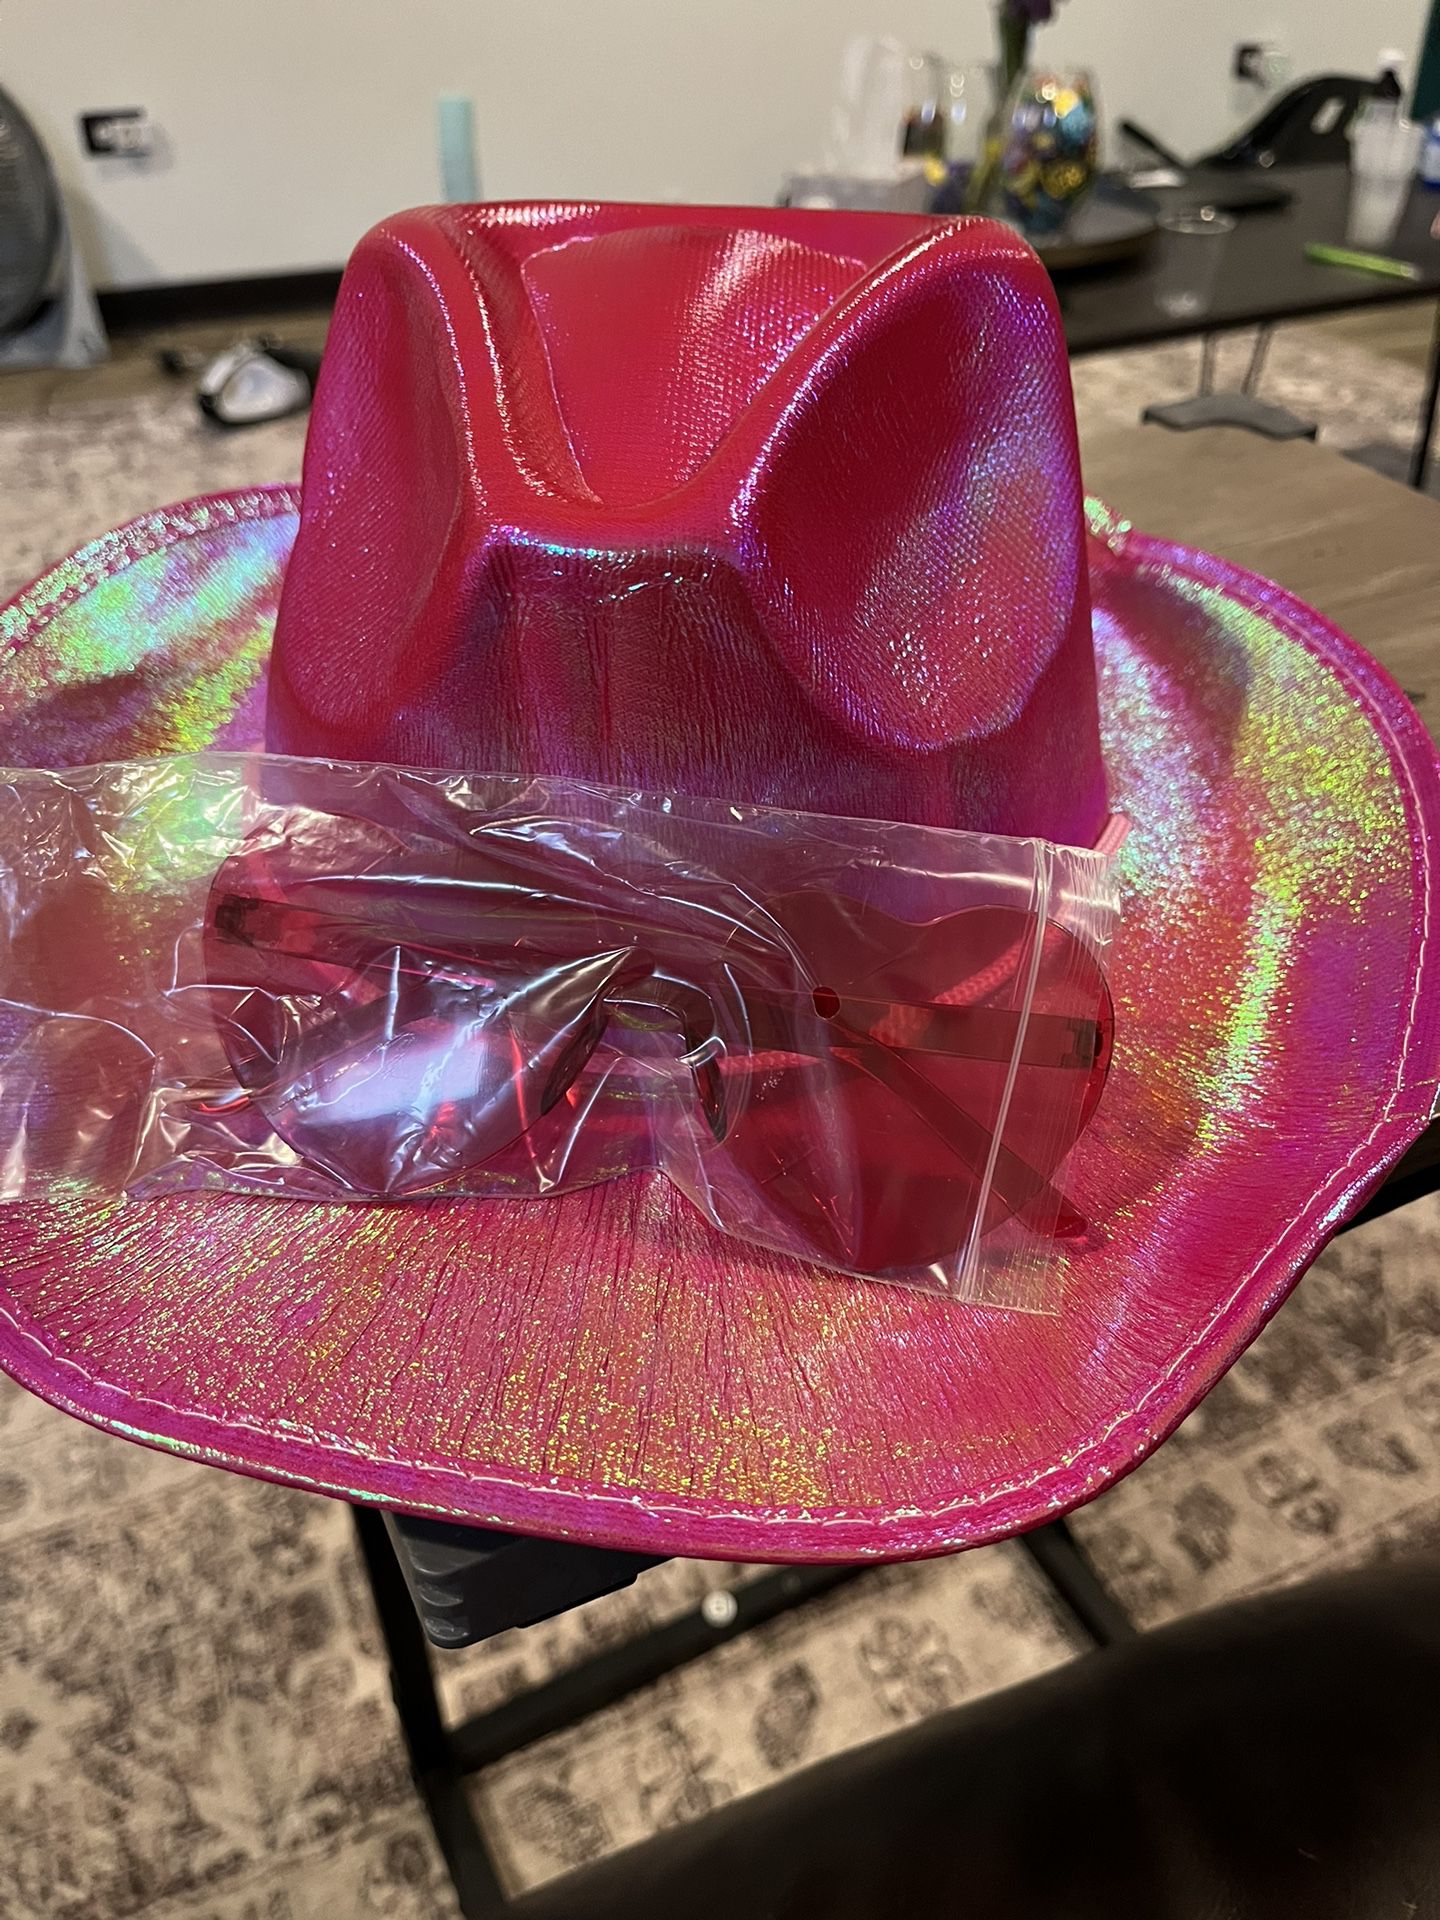 New Women’s Pink Or White Shiny Cowboy Hats With Matching Heart Glasses $10 Without Glasses $8